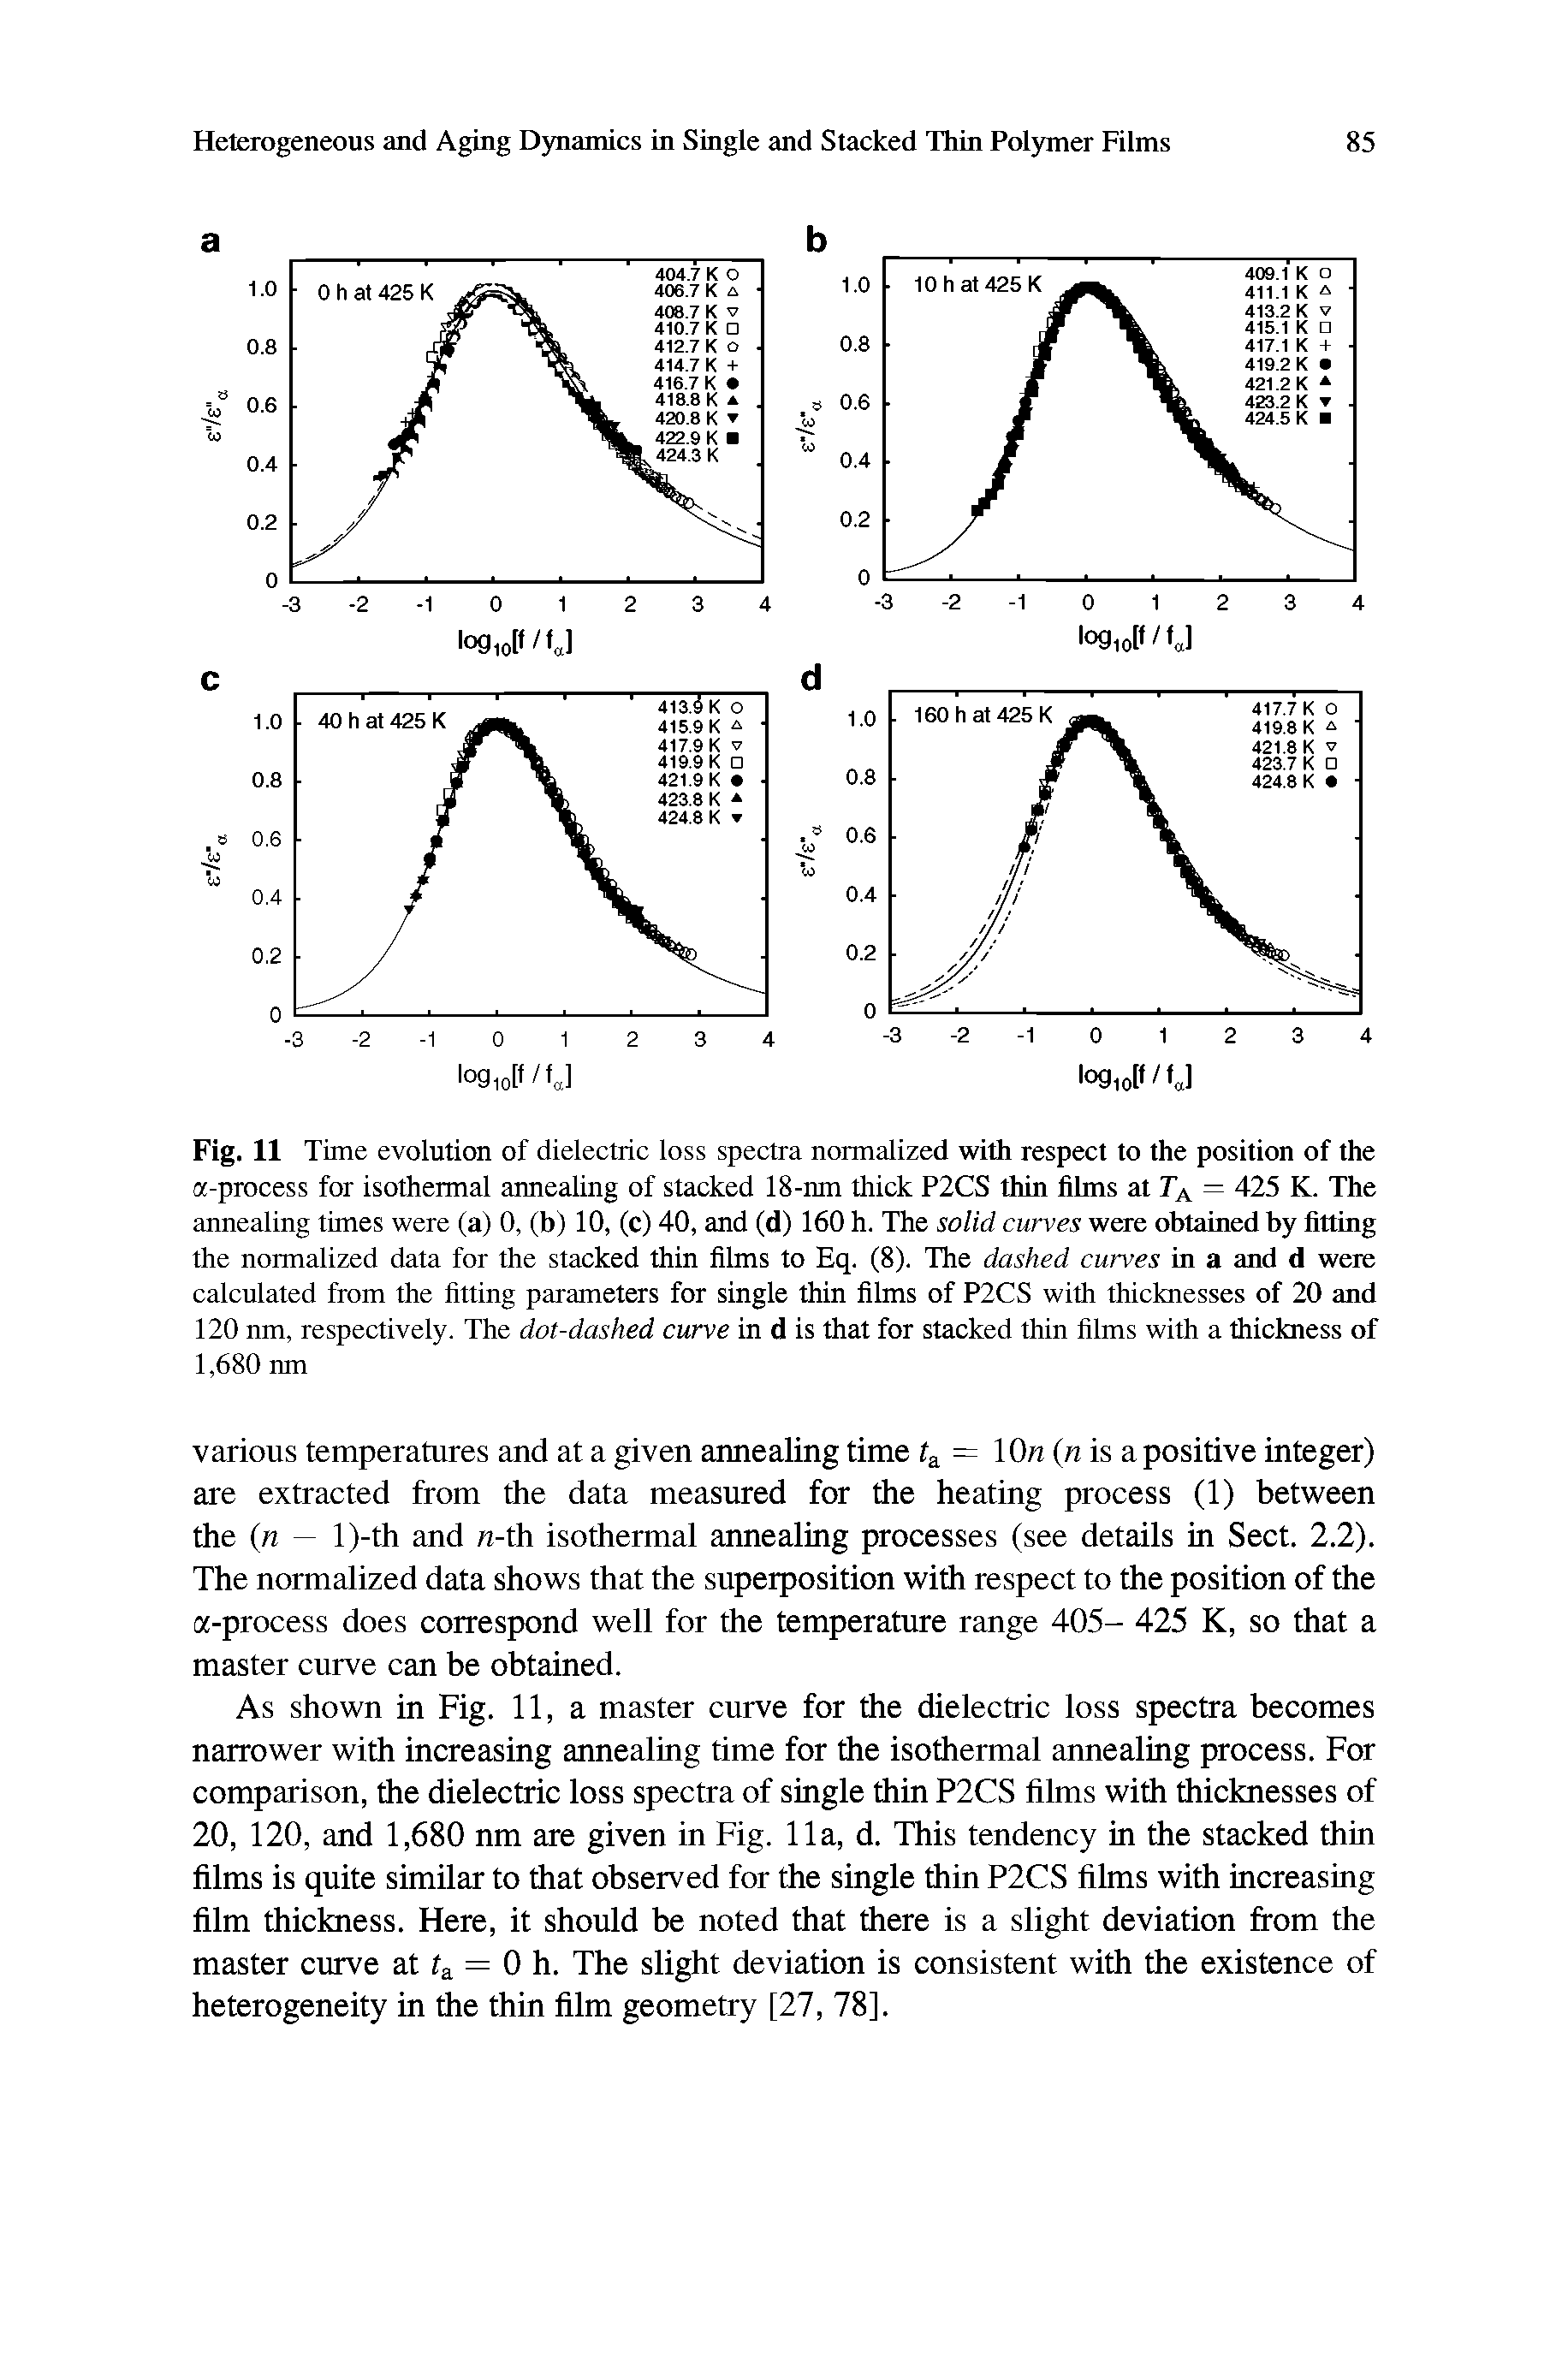 Fig. 11 Time evolution of dielectric loss spectra normalized with respect to the position of the a-process for isothermal annealing of stacked 18-nm thick P2CS thin films at = 425 K. The annealing times were (a) 0, (b) 10, (c) 40, and (d) 160 h. The solid curves were obtained by fitting the normalized data for the stacked thin films to Eq. (8). The dashed curves in a and d were calculated from the fitting parameters for single thin films of P2CS with thicknesses of 20 and 120 nm, respectively. The dot-dashed curve in d is that for stacked thin films with a thickness of 1,680 nm...